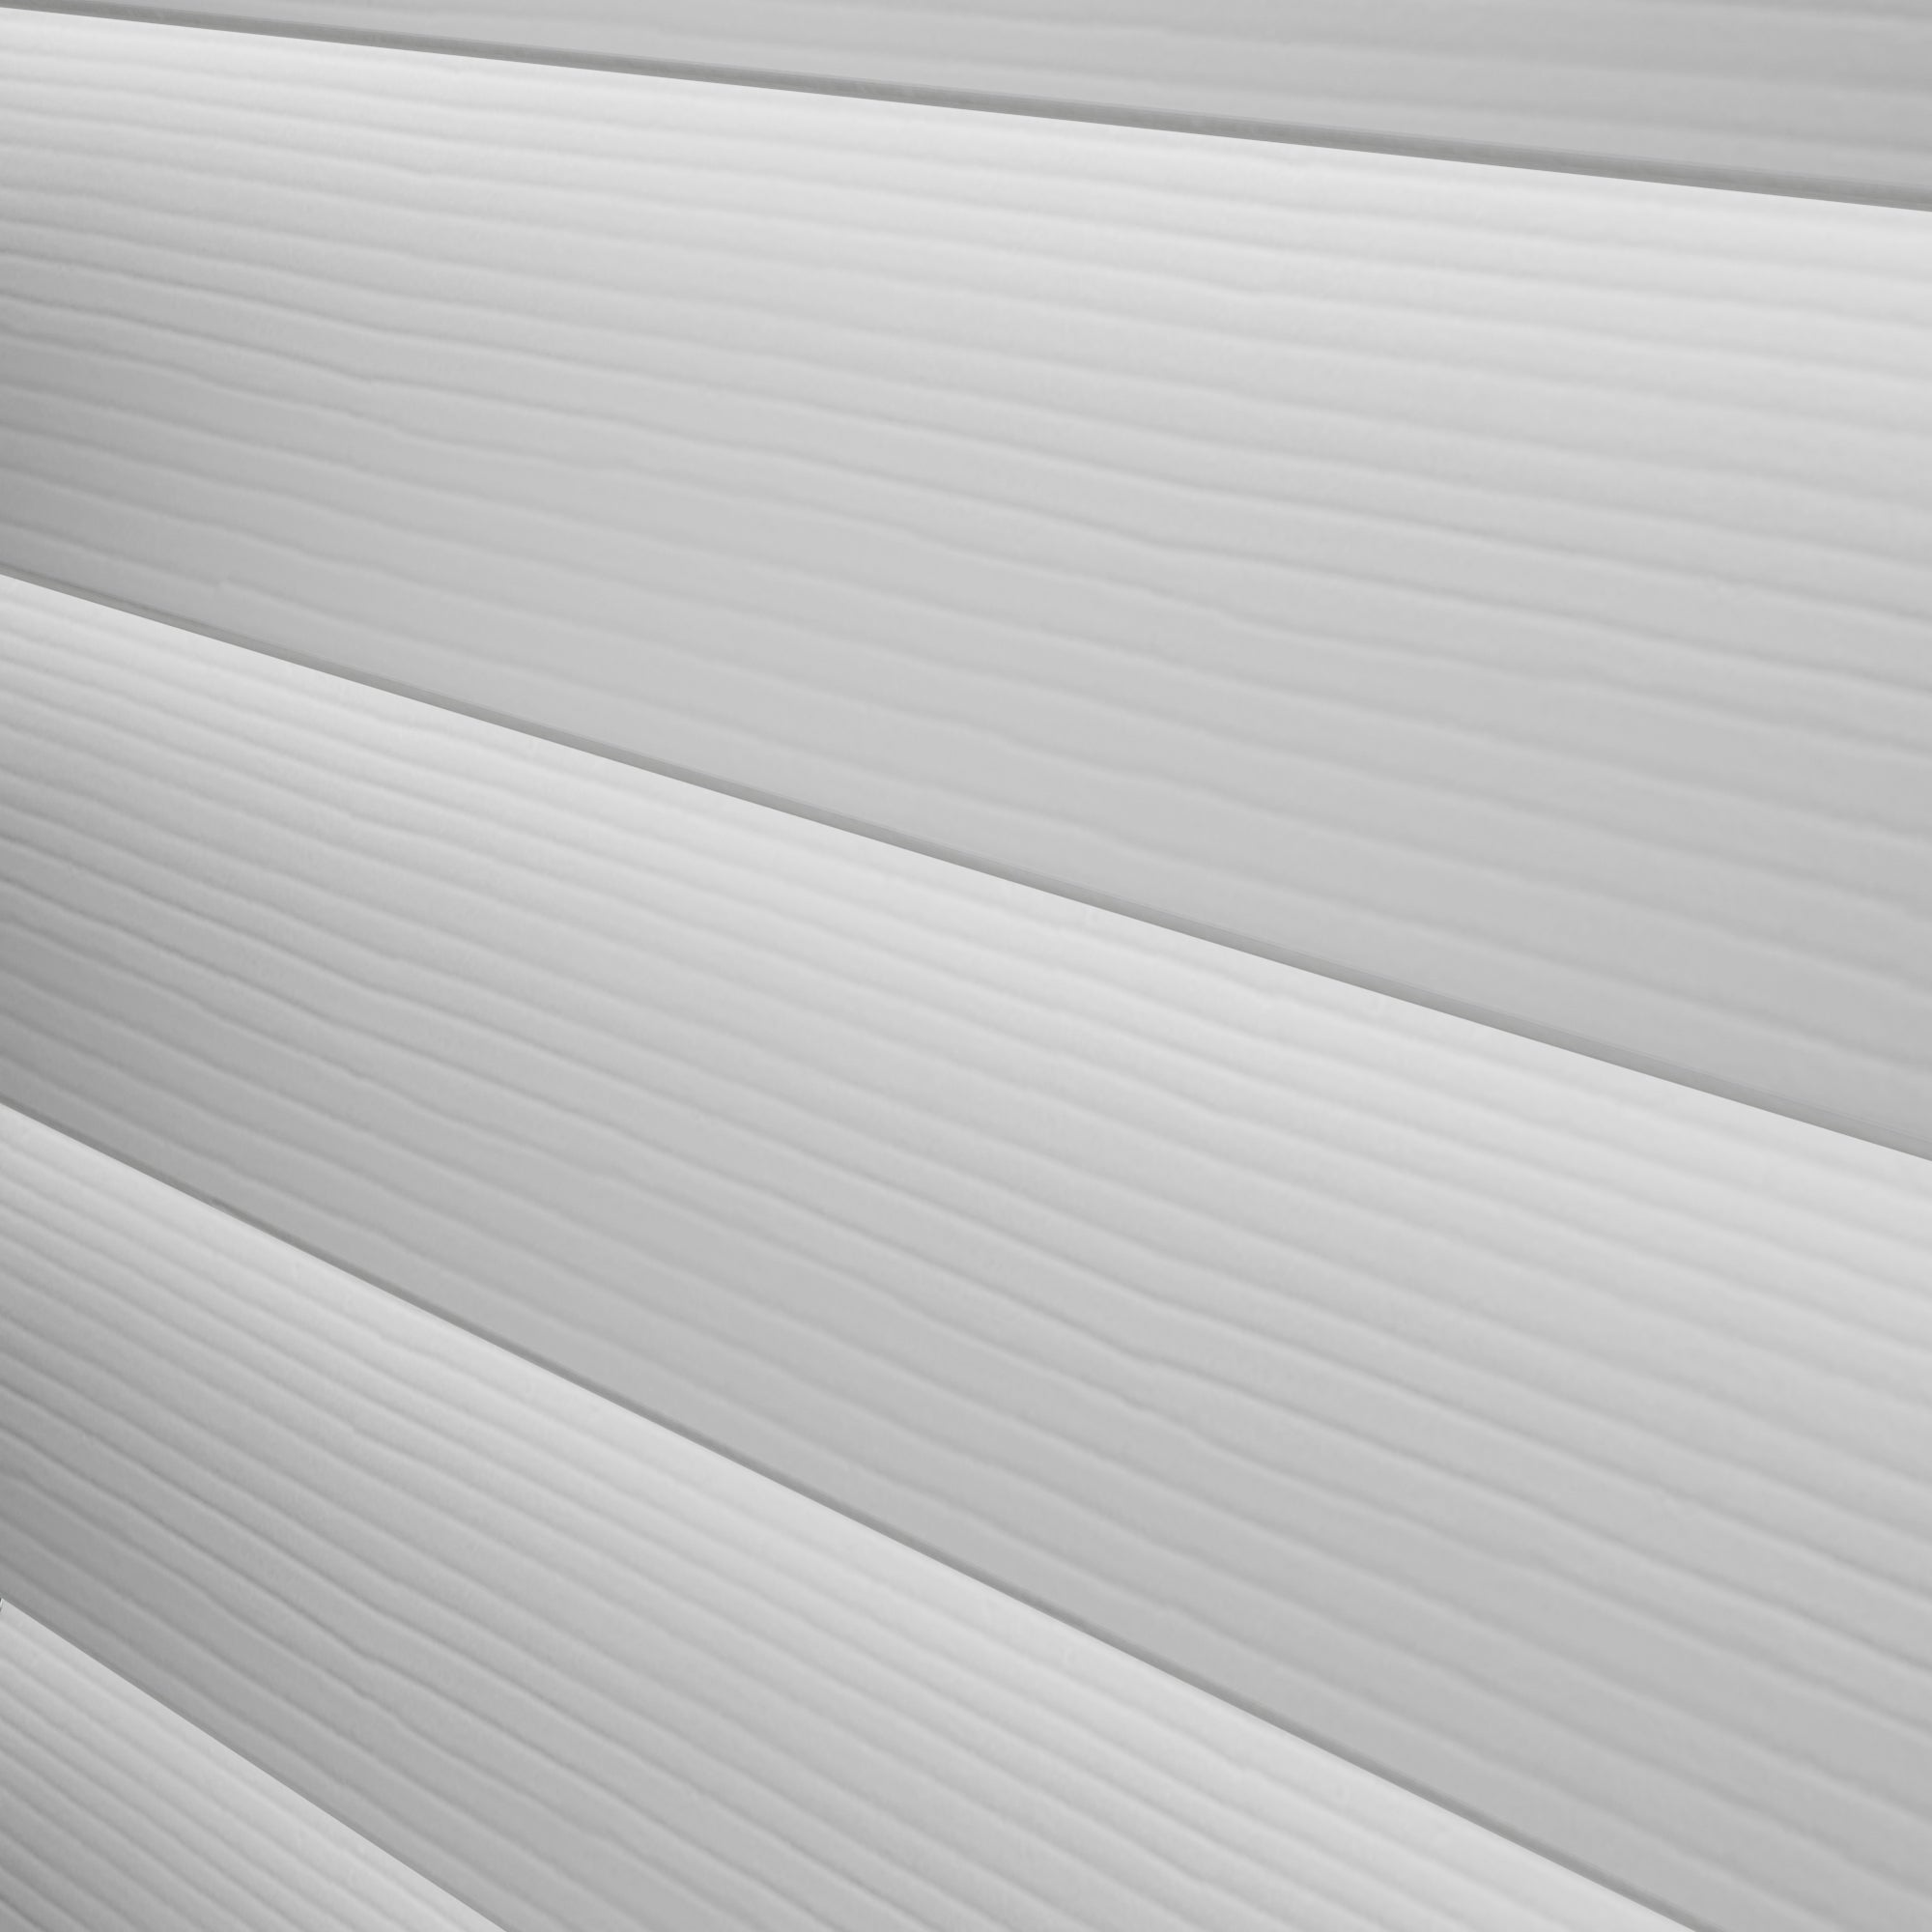 Made To Measure 50mm Slats White Textured Taped Venetian Blind Textured White